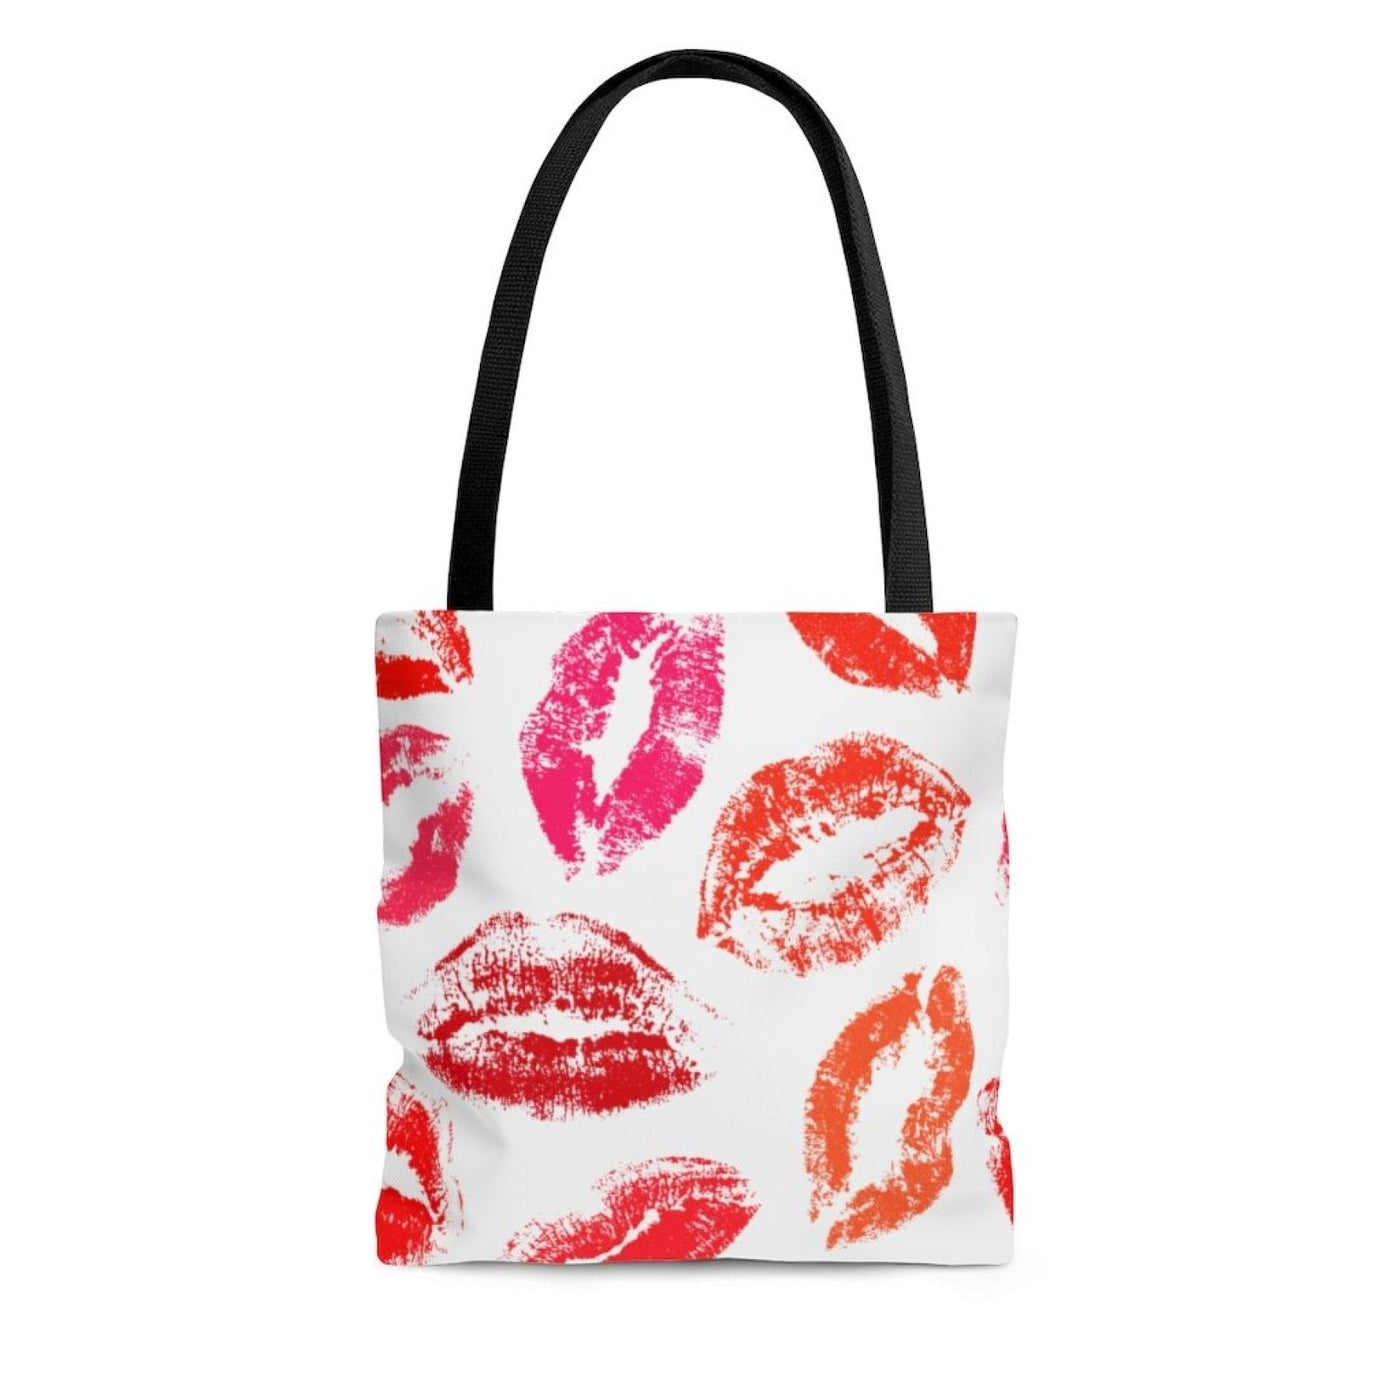 Canvas Tote Bags Xoxo White And Red Lipstick Kisses Style Shoulder Bag - Bags |